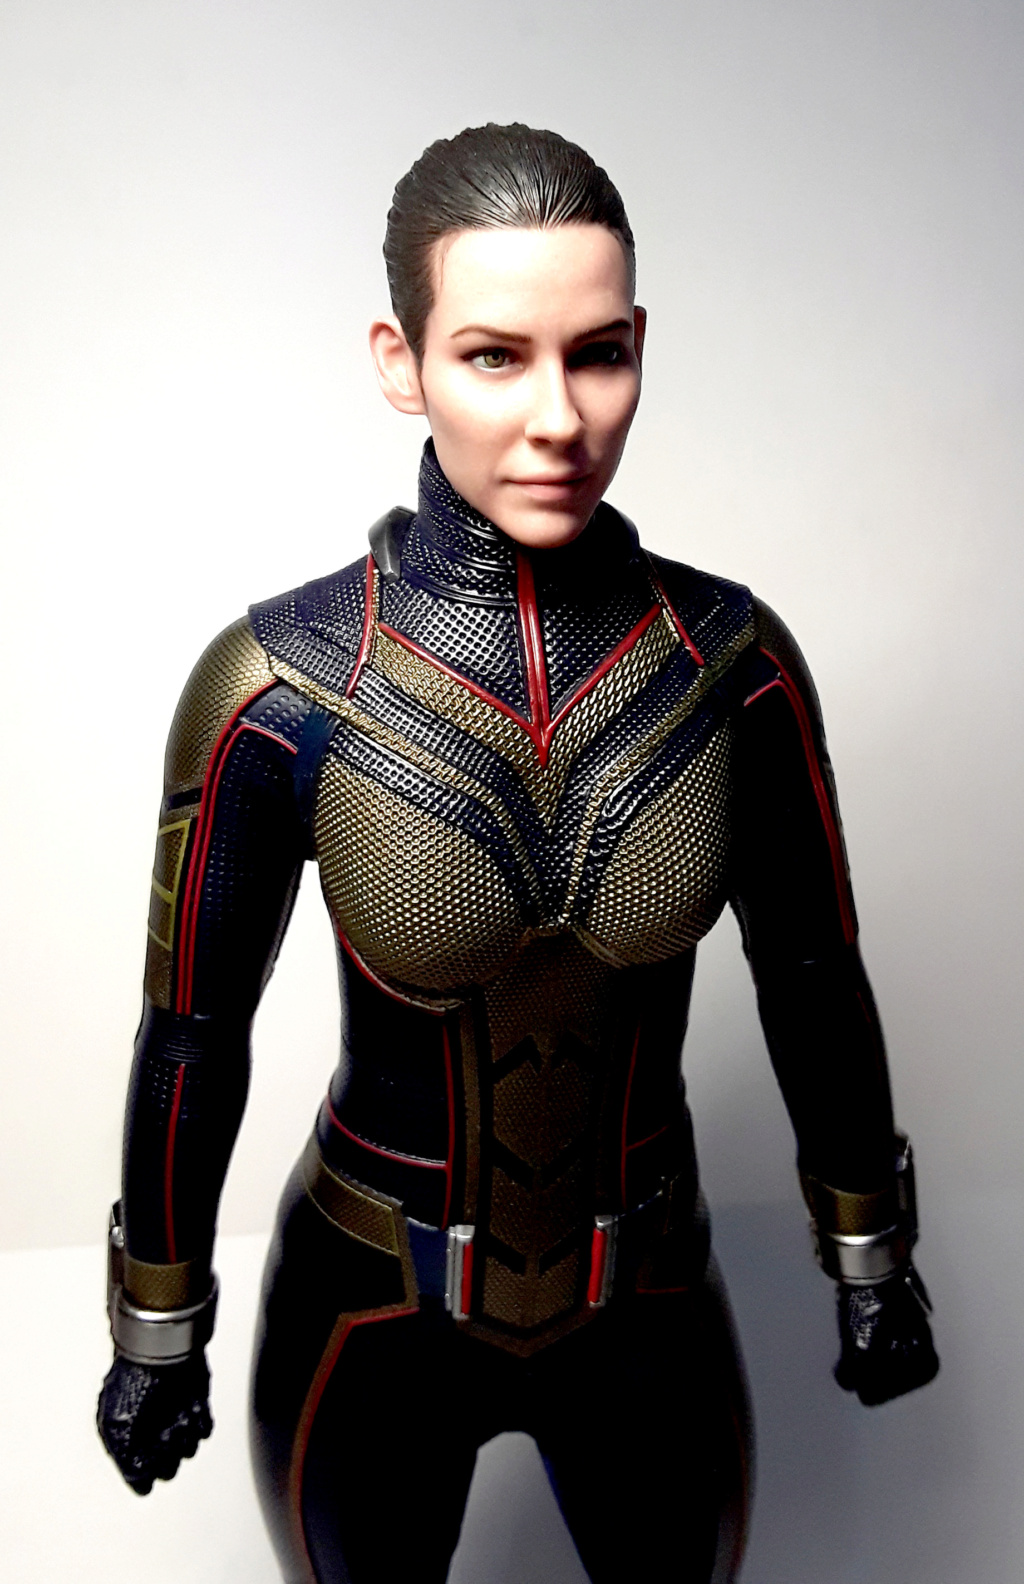 TheWasp - NEW PRODUCT: HOT TOYS: ANT-MAN AND THE WASP - THE WASP 1/6 COLLECTIBLE FIGURE (Full Details UP) Wasp_110